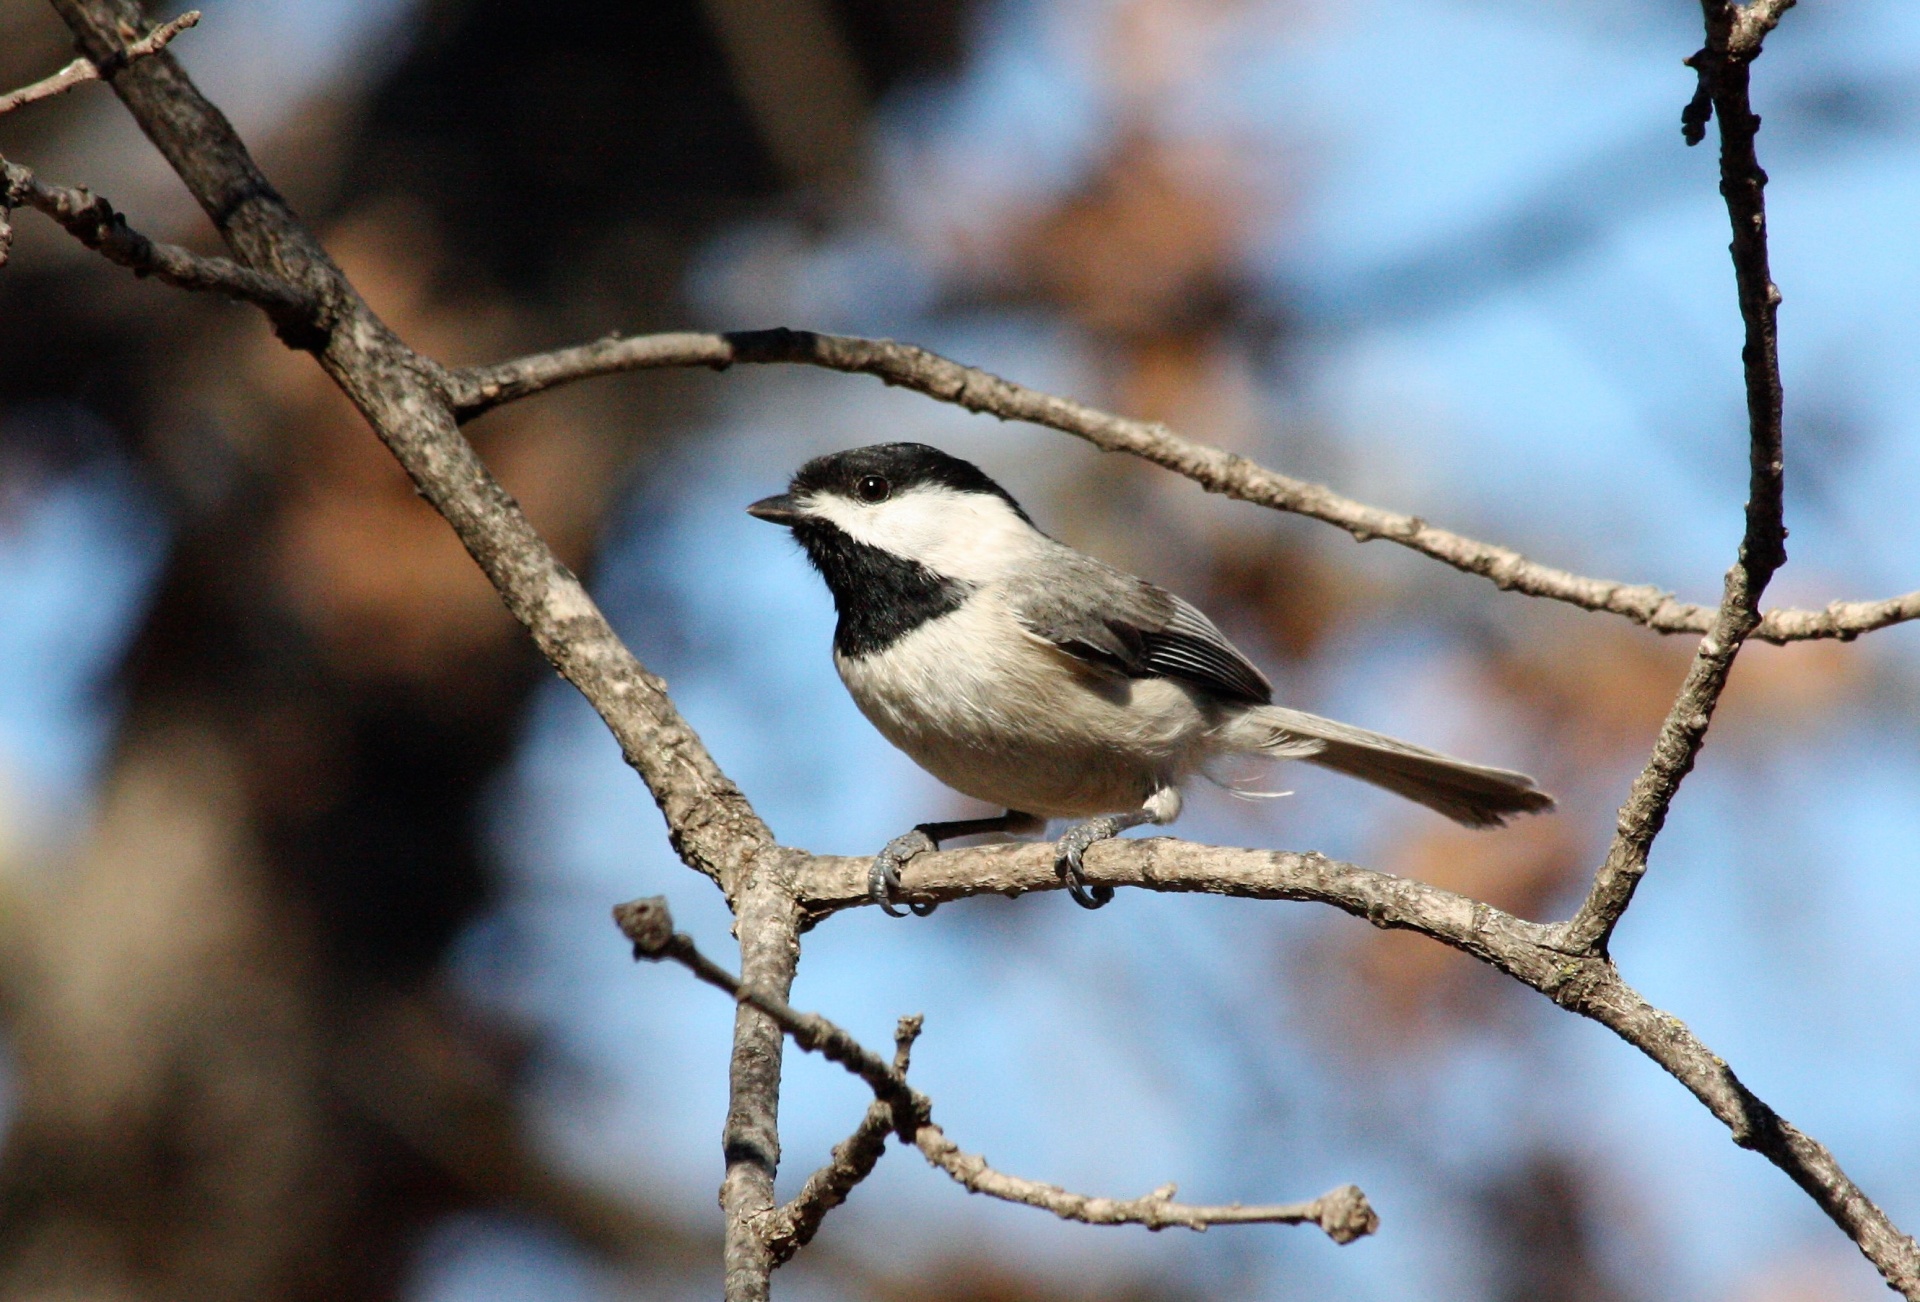 A cute little black-capped chickadee sits on a tree branch, framed by the branches, on a blue sky background in winter.